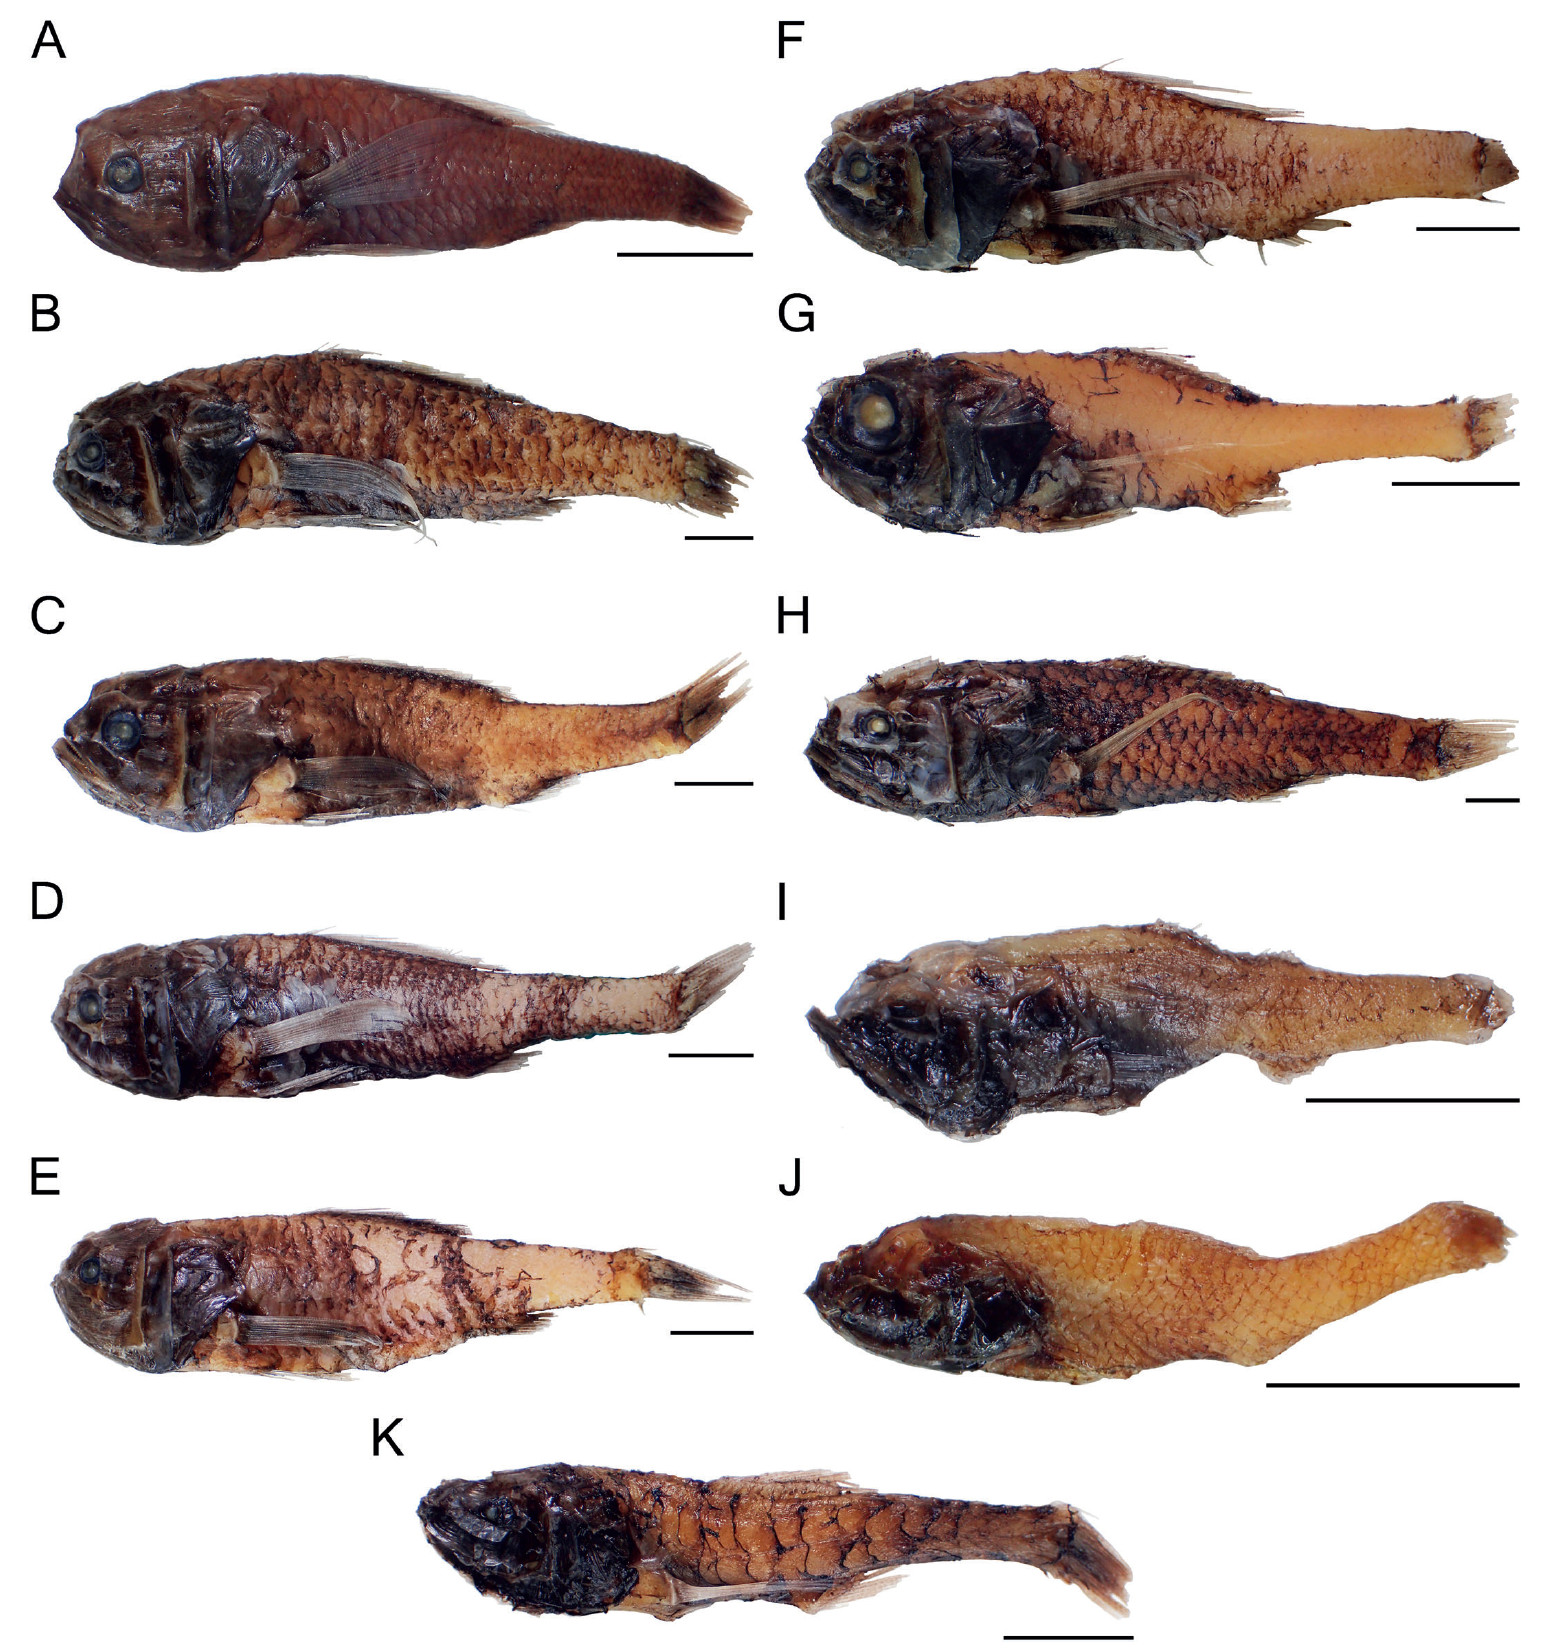 Taxonomy and distribution of deep-dea bigscales and whalefishes (Teleostei: Stephanoberycoidei) collected off Northeastern Brazil, including seamounts and oceanic islands of the region